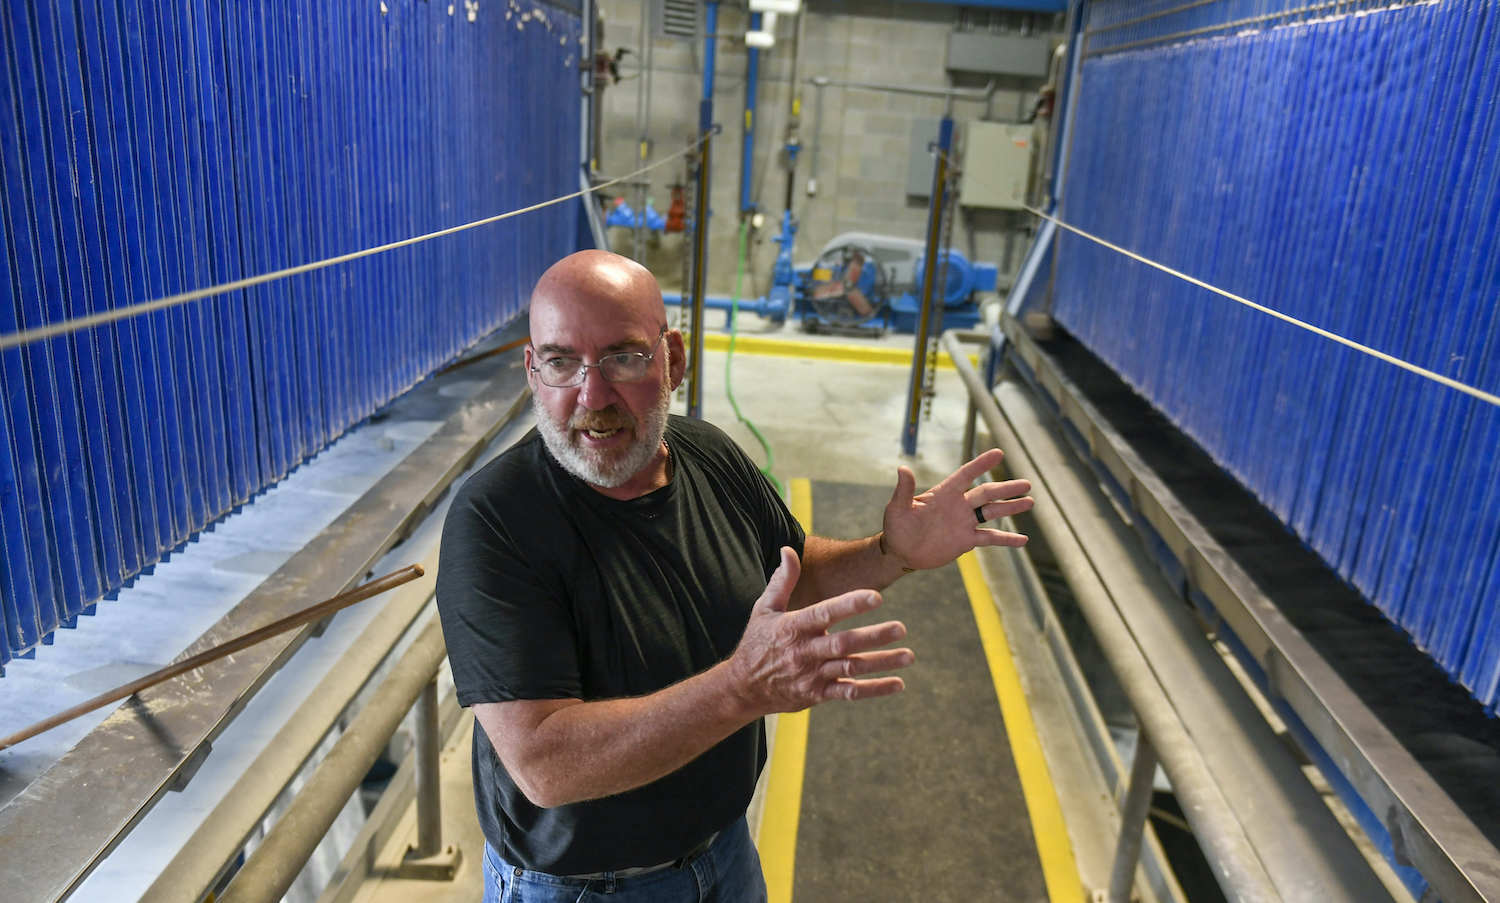 Doug Rainforth, City of Fairmont water plant supervisor, talks with a reporter between two filter presses at the Fairmont Water Treatment Plant, July 16, in Fairmont MN. August 2021